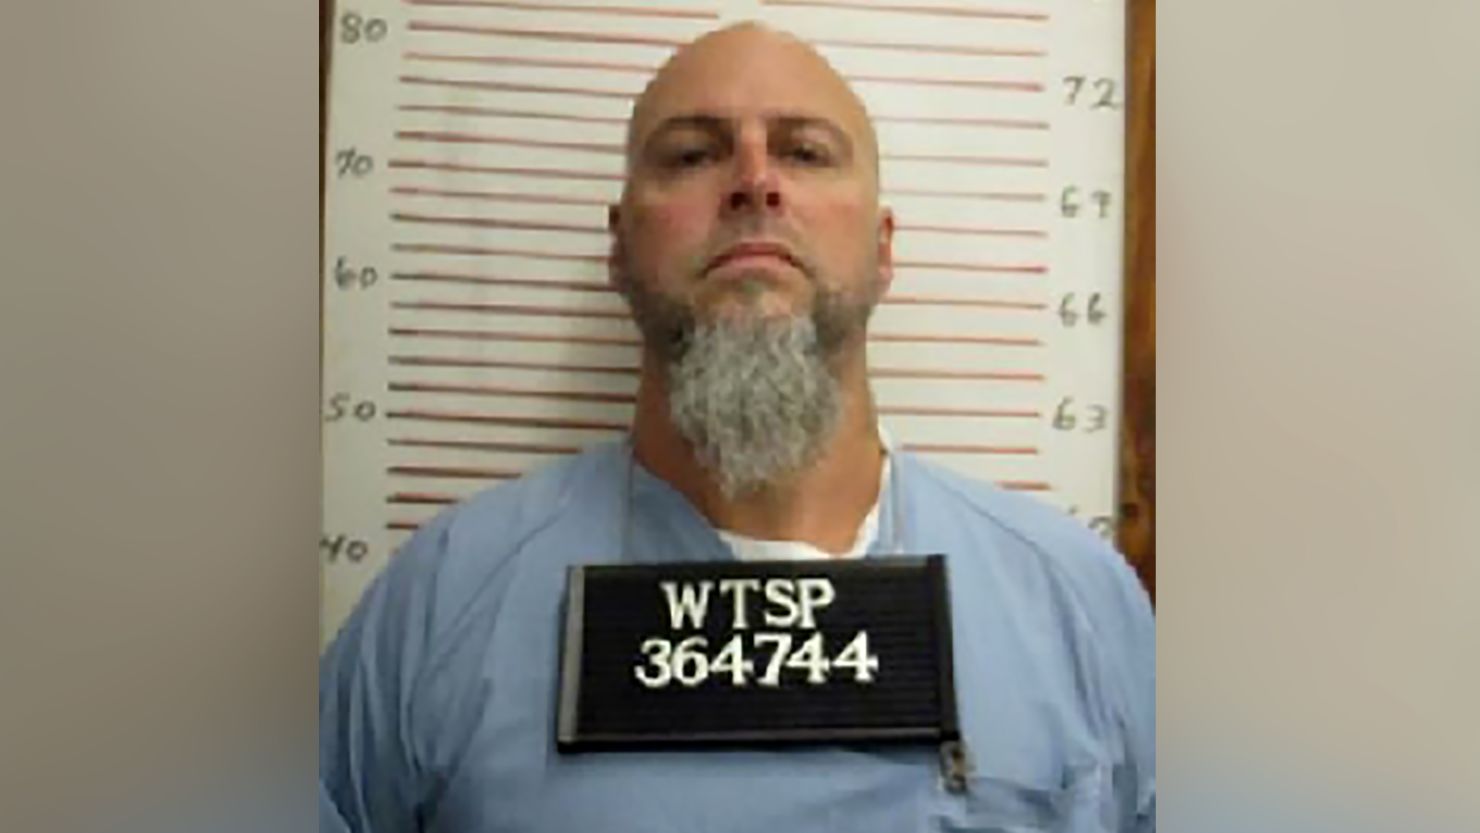 Officials doing a count during a lockdown could not find Curtis Ray Watson, who worked on a farm detail.